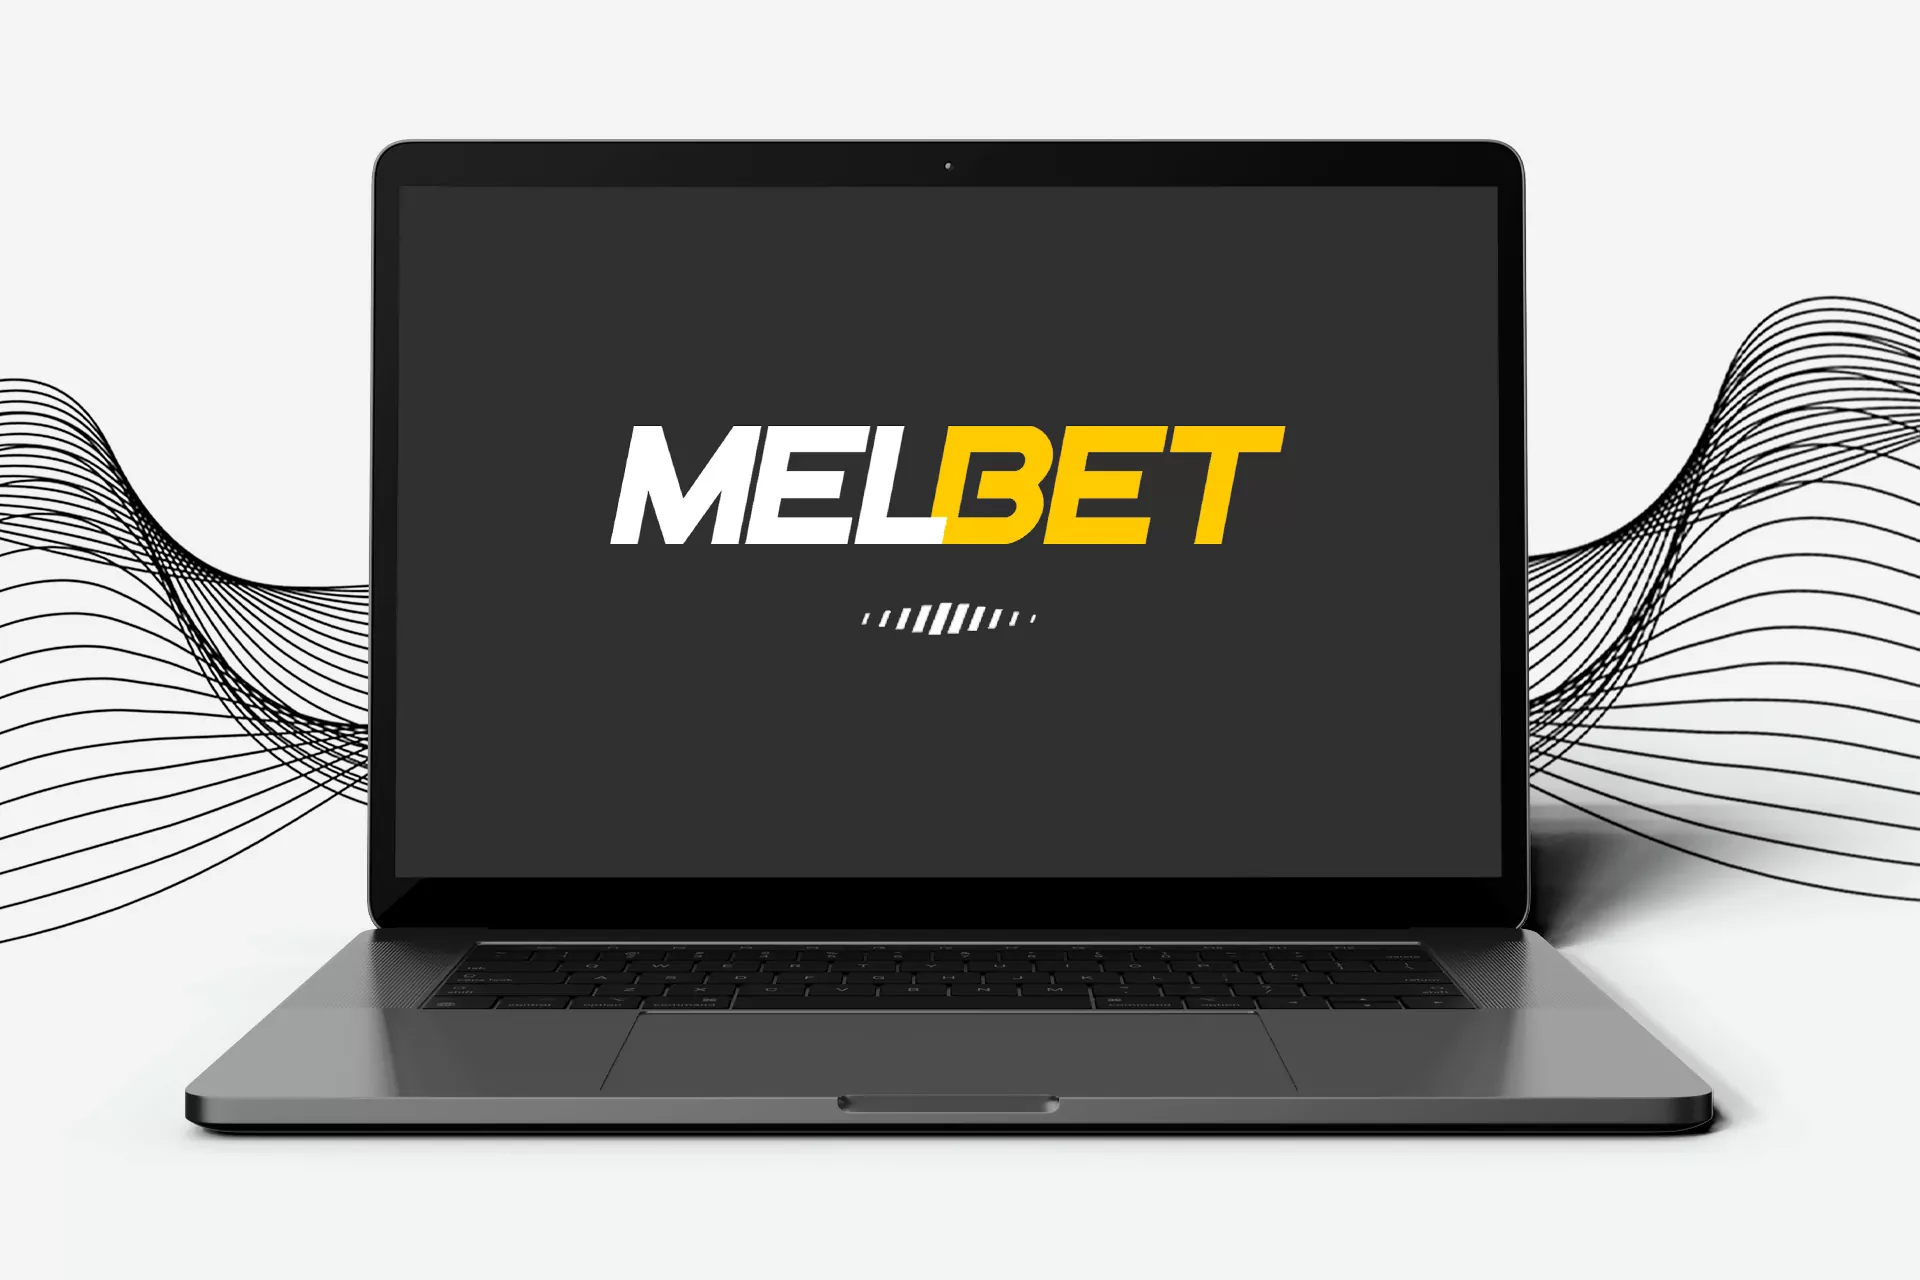 Using a Melbet PC client simplifies the managing of a user's account.